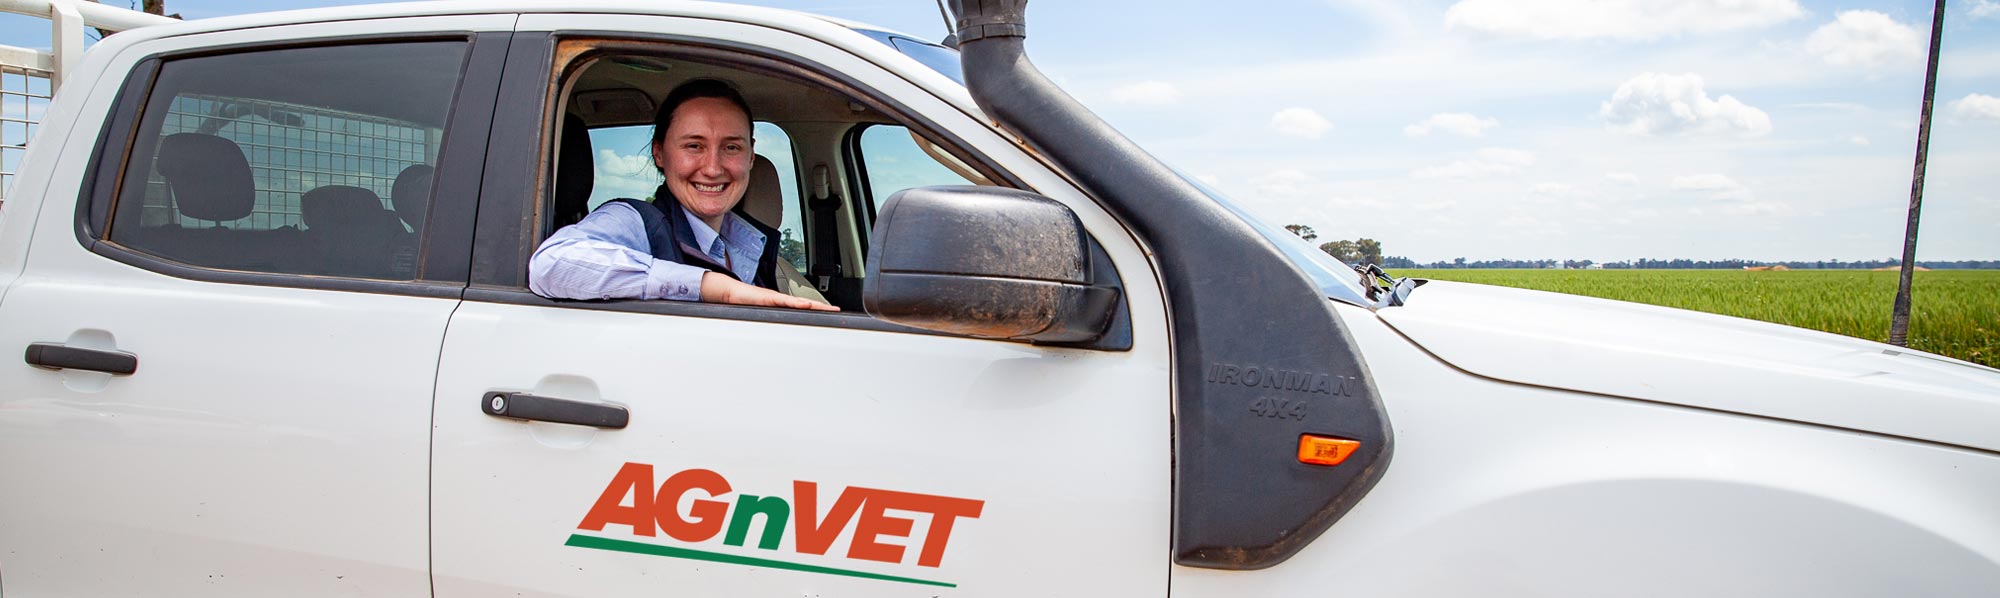 AGnVET-Agriculture-Careers-jobs-img-20